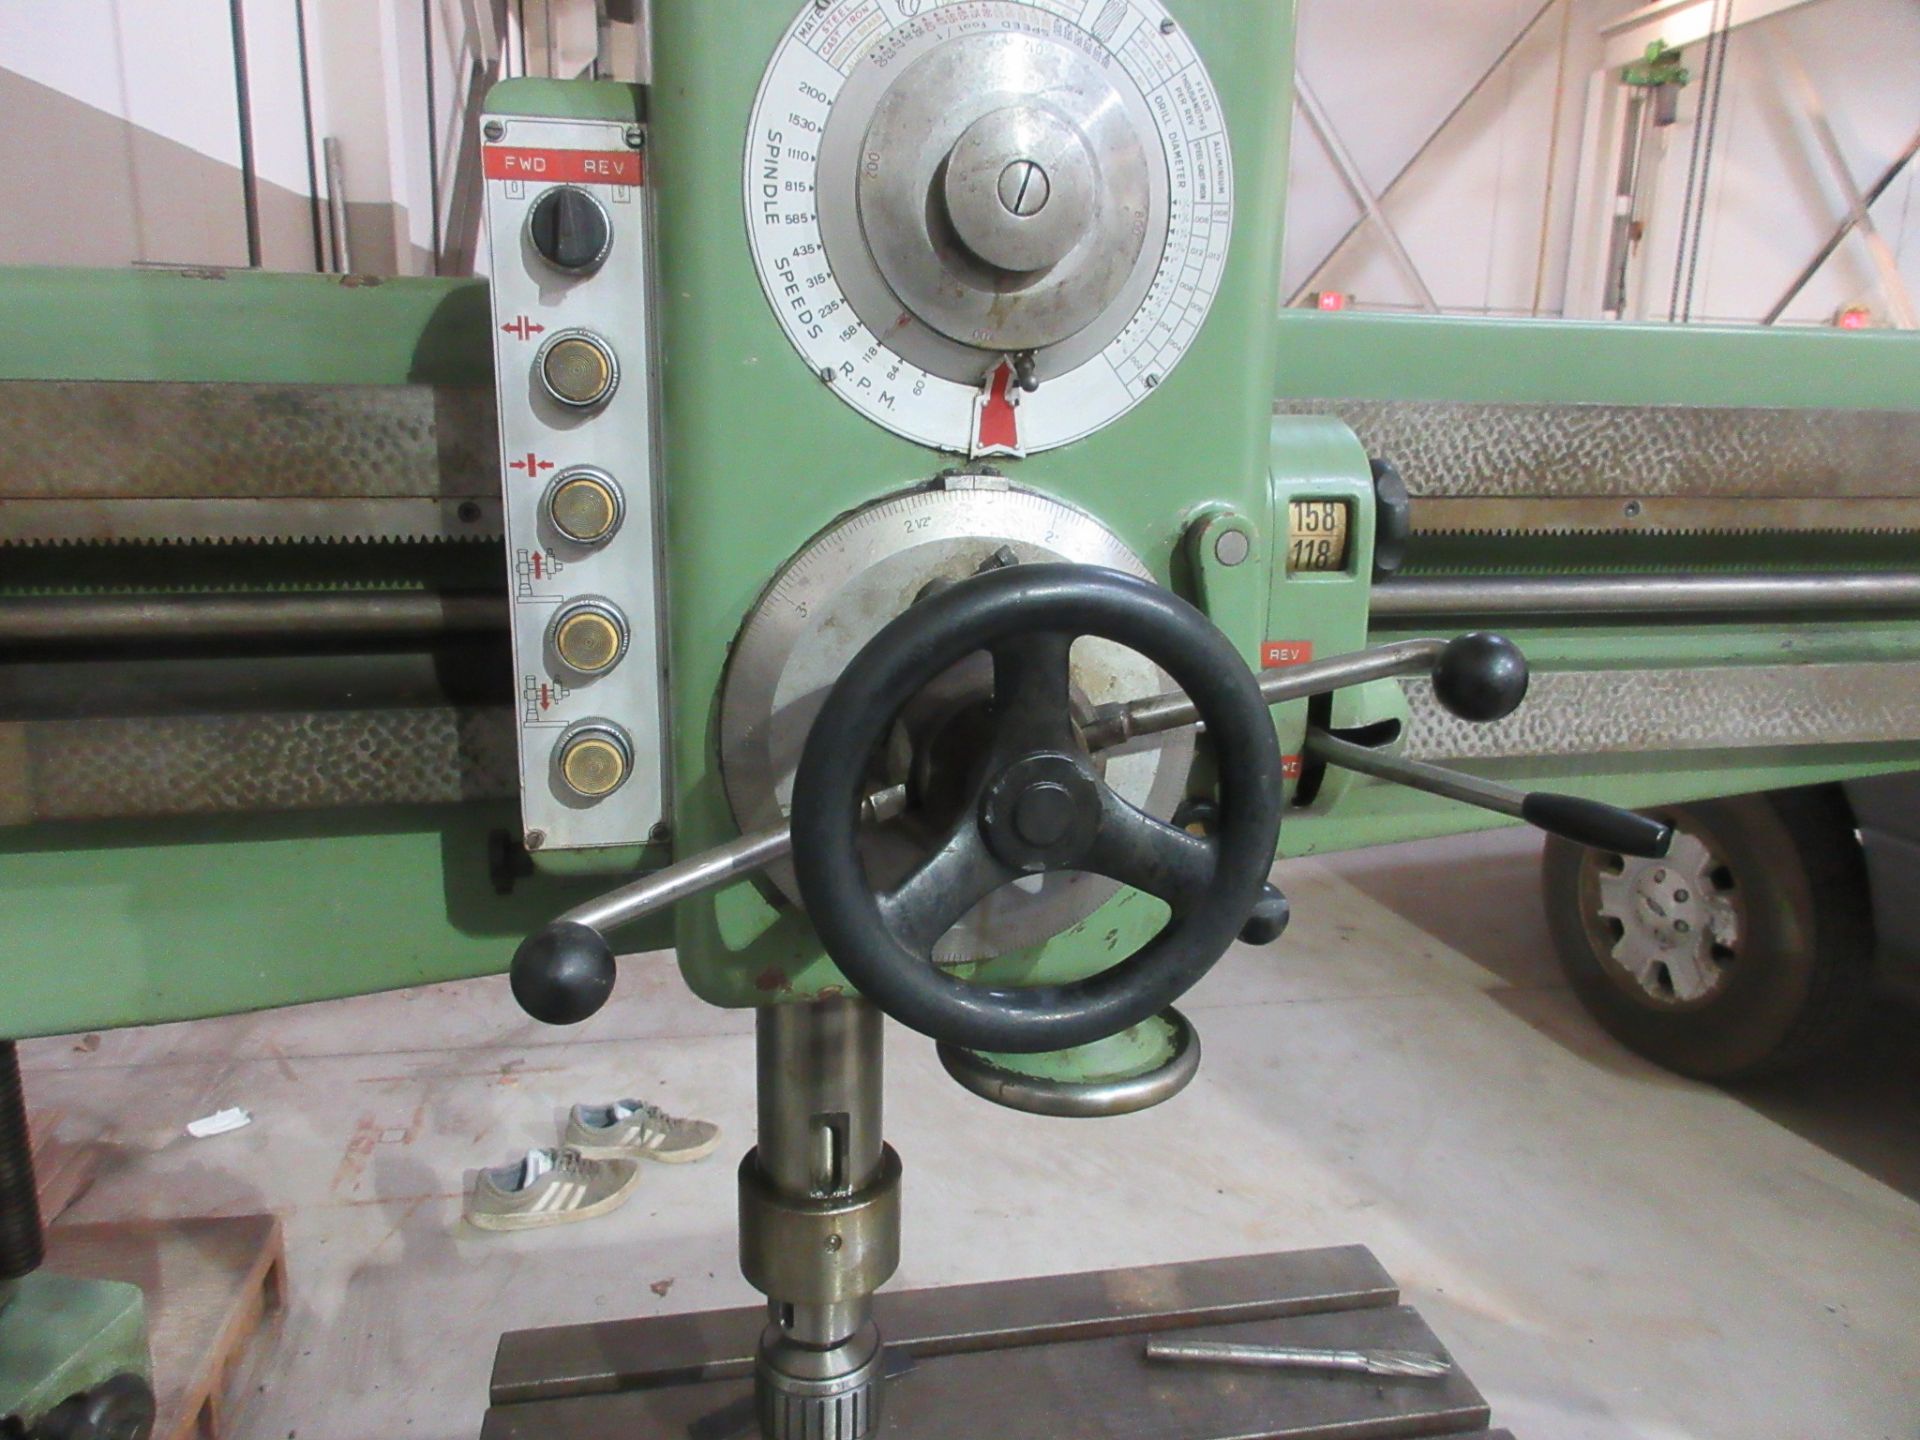 EMA RADIAL ARM DRILL, 4' ARM W/ BOX TABLE - Image 4 of 5